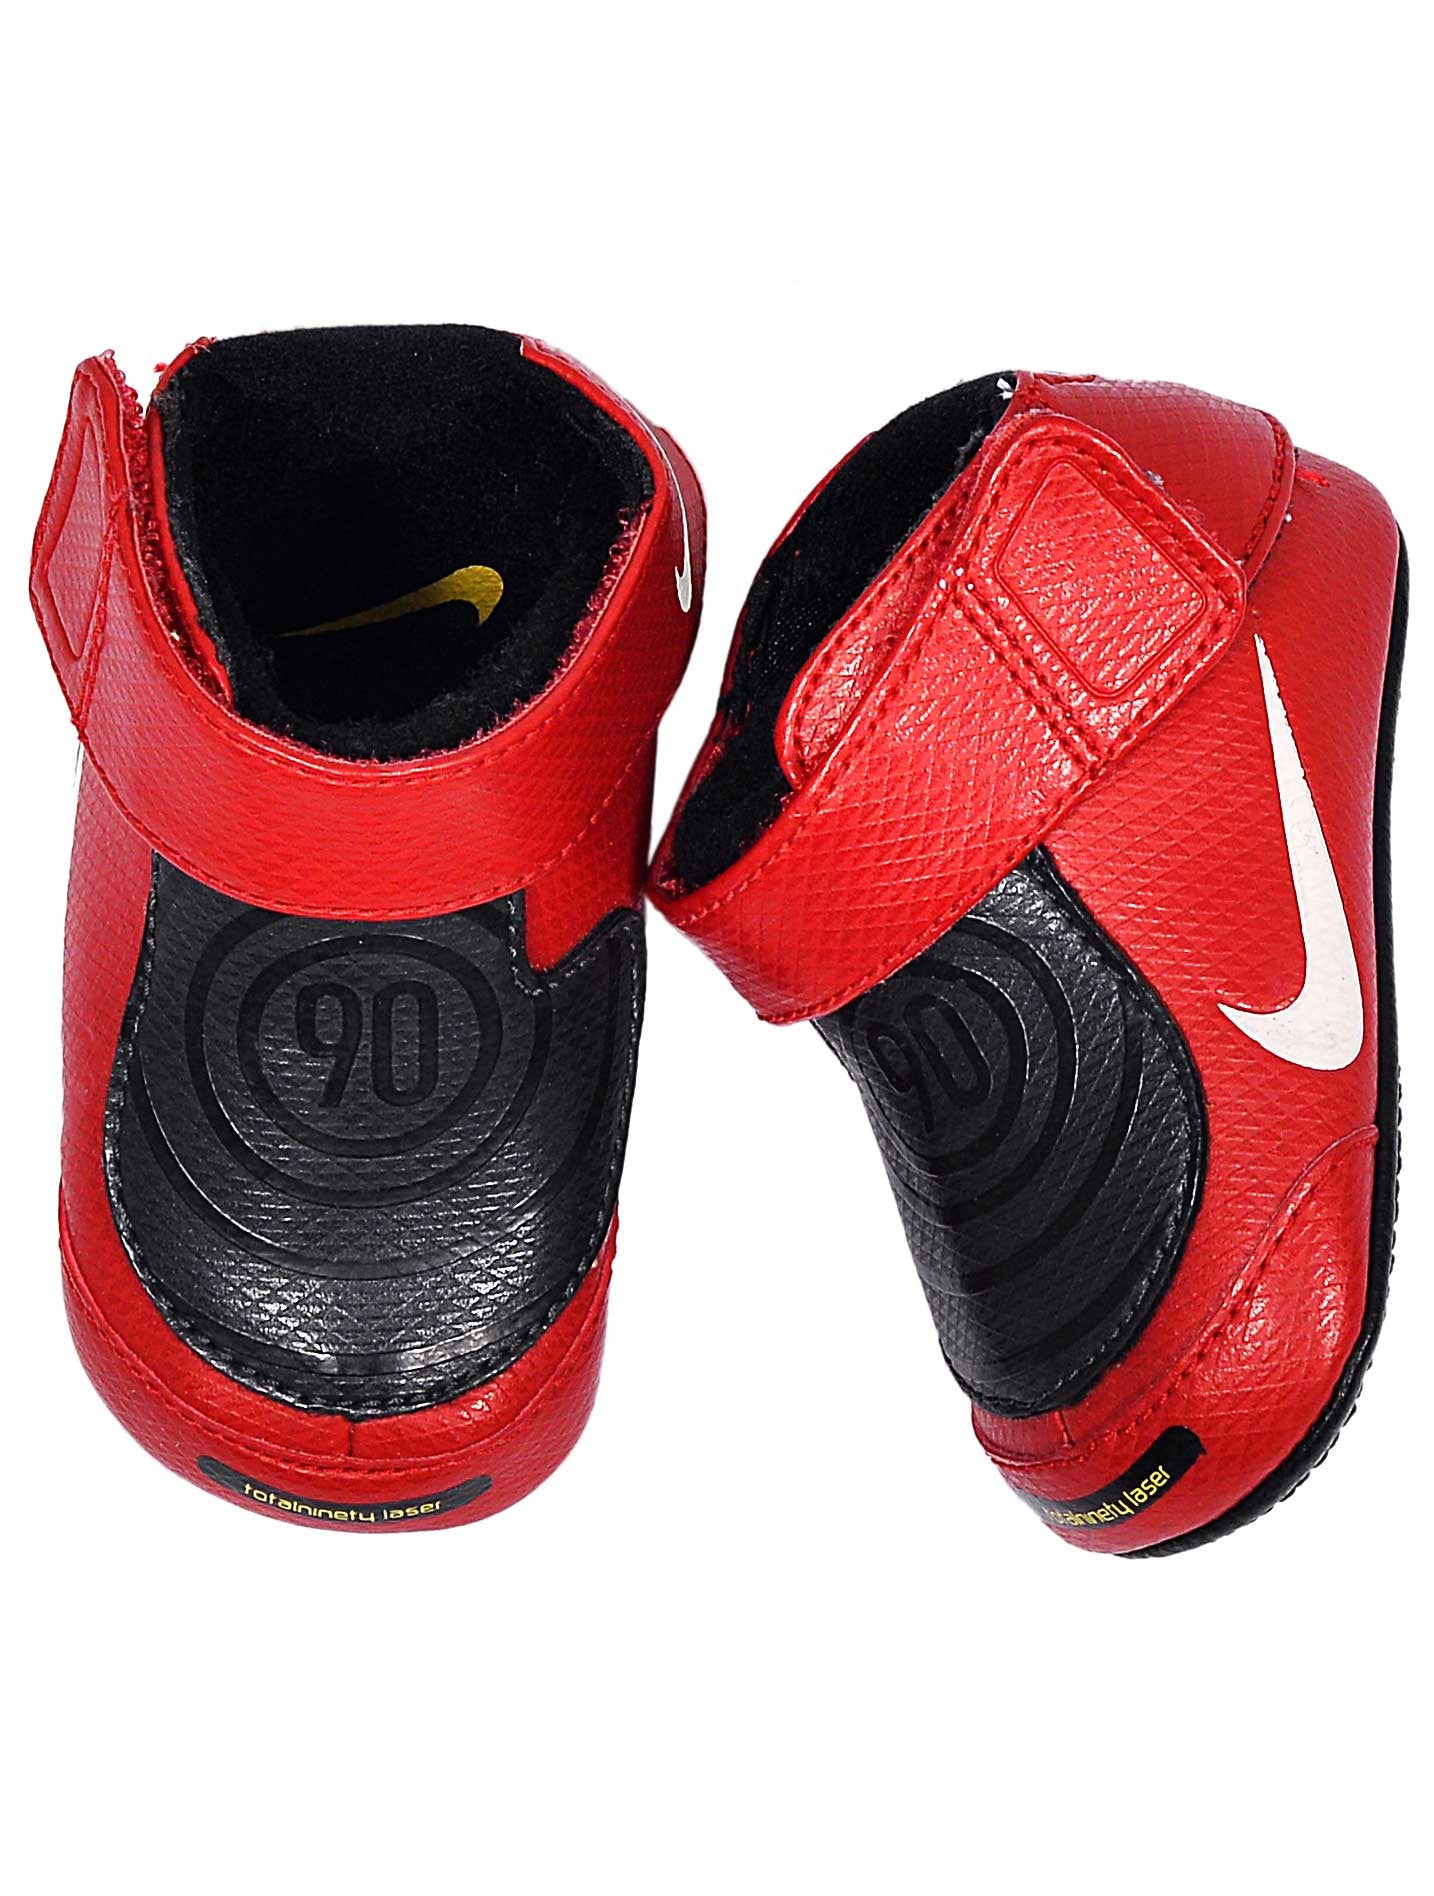 total sports baby shoes